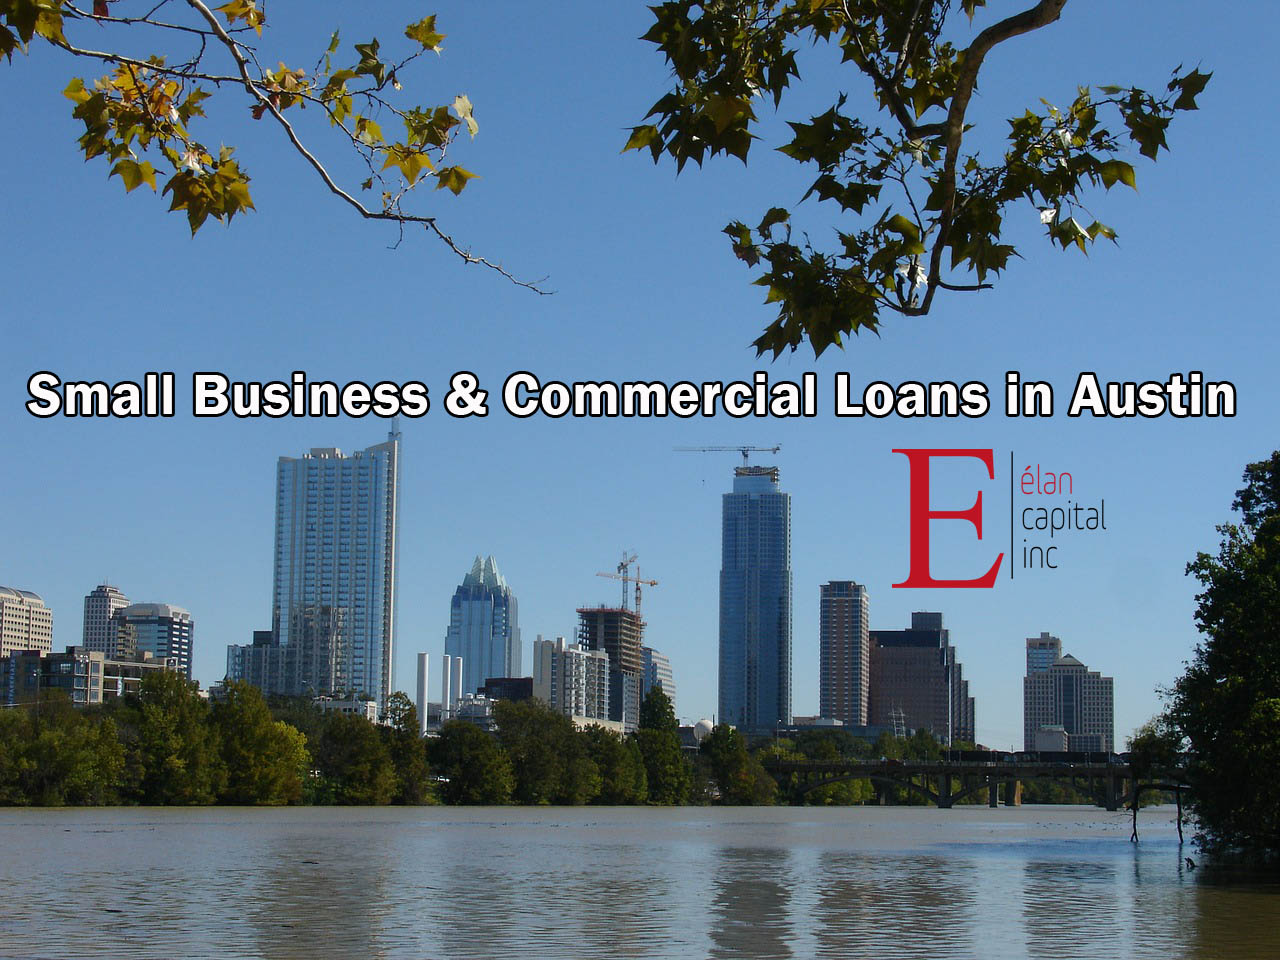 Small Business and Commercial Loans in Austin - Elan Capital